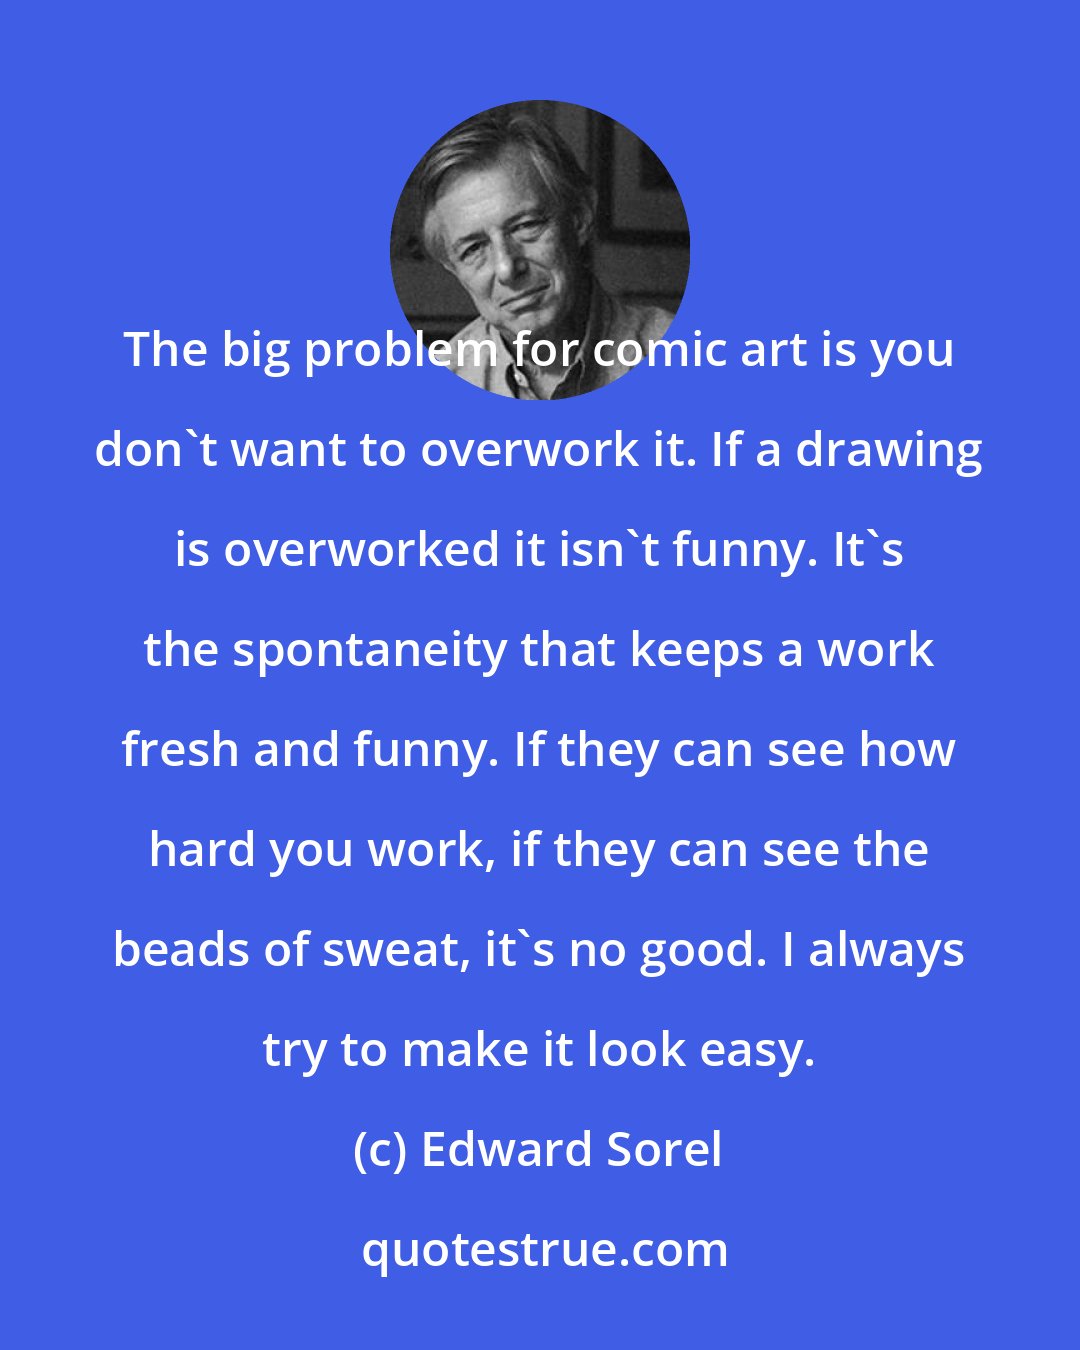 Edward Sorel: The big problem for comic art is you don't want to overwork it. If a drawing is overworked it isn't funny. It's the spontaneity that keeps a work fresh and funny. If they can see how hard you work, if they can see the beads of sweat, it's no good. I always try to make it look easy.